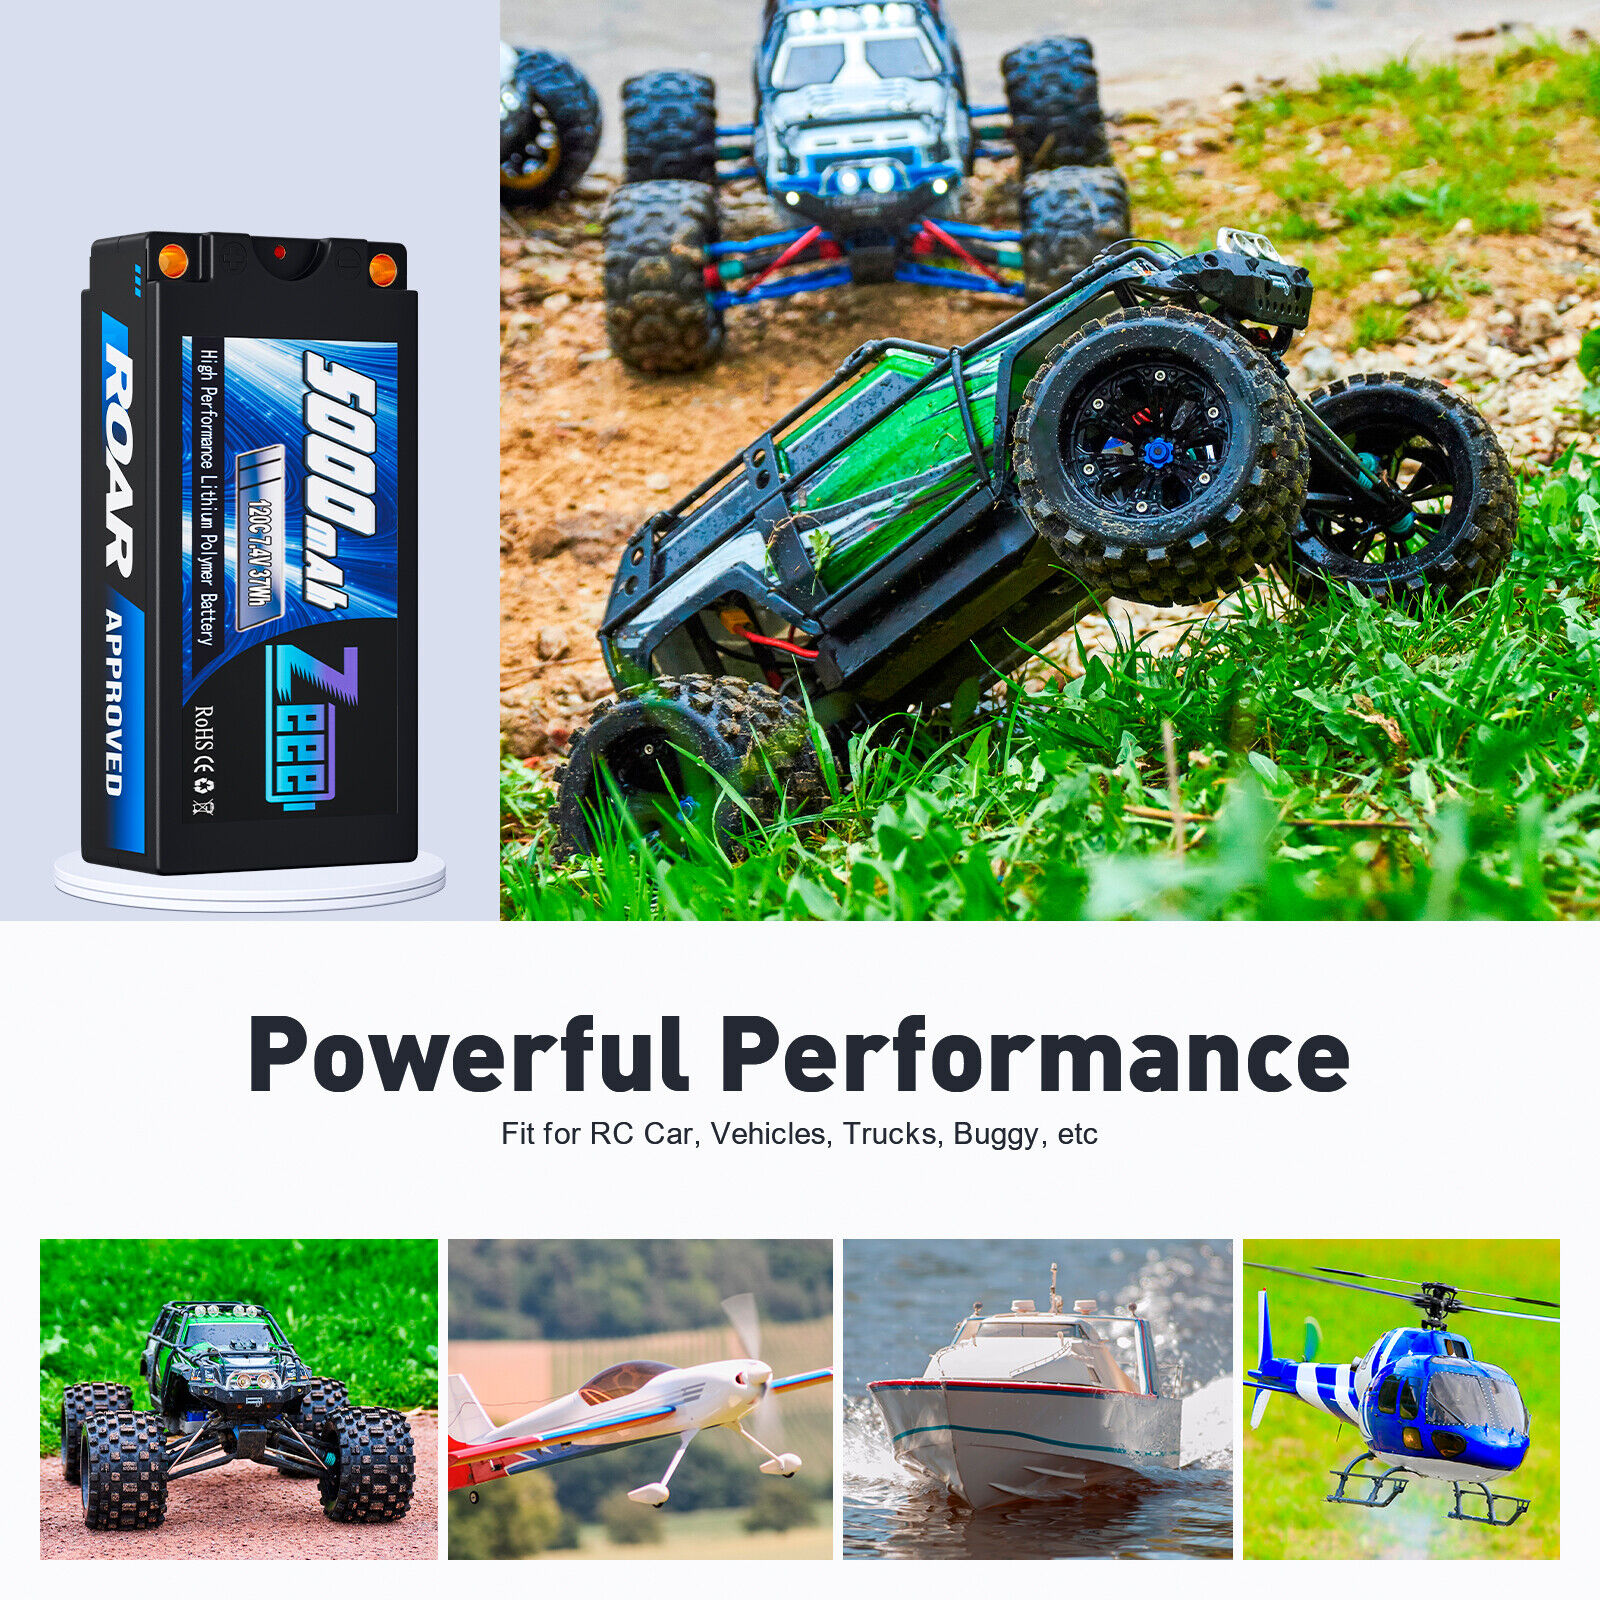 2x Zeee 2S Lipo Battery 5000mAh 7.4V 120C 5mm Bullet to Deans Shorty for RC Car ZEEE Does Not Apply - фотография #5